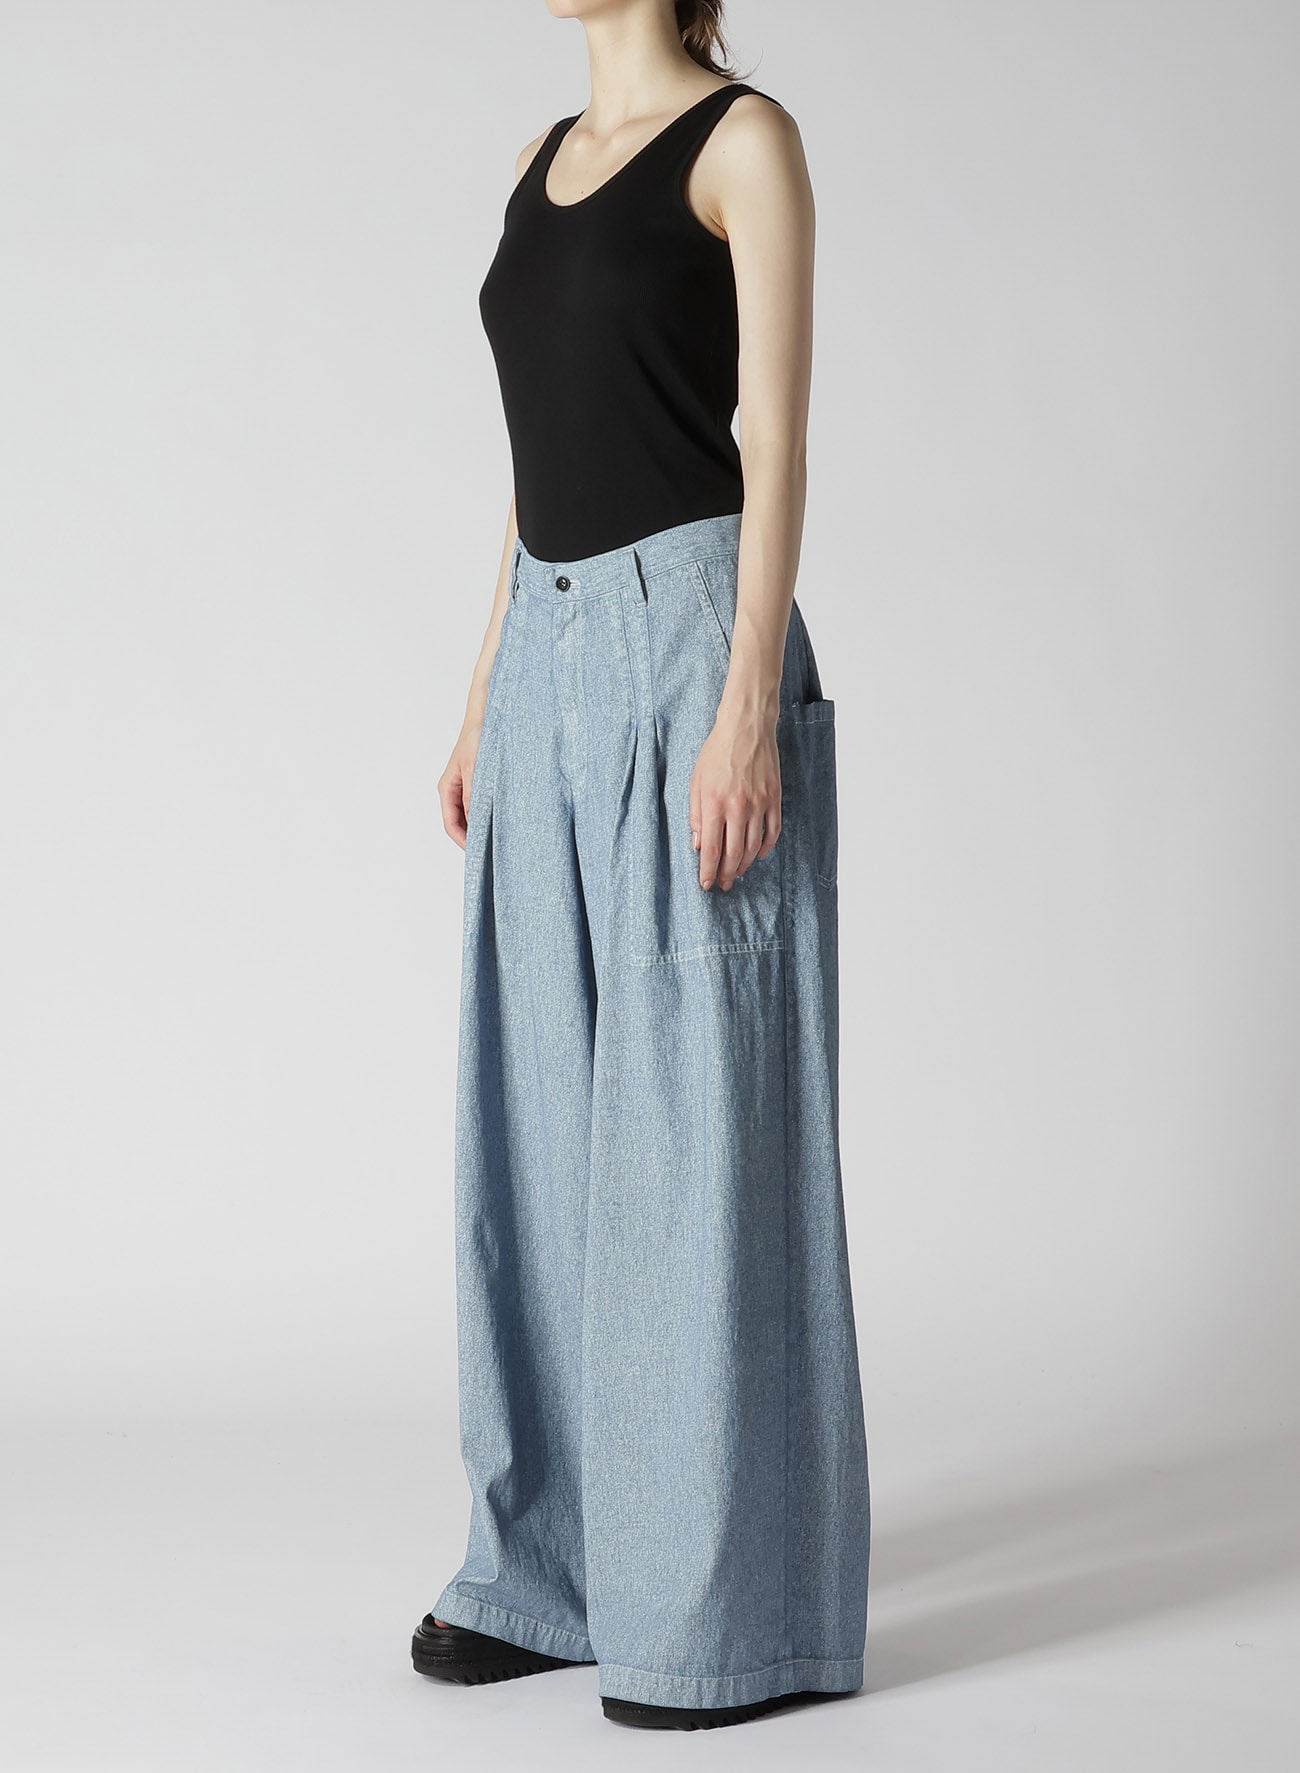 WHITE PIGMENT COATED DENIM PLEATED WIDE PANTS(XS Blue): Y's｜THE